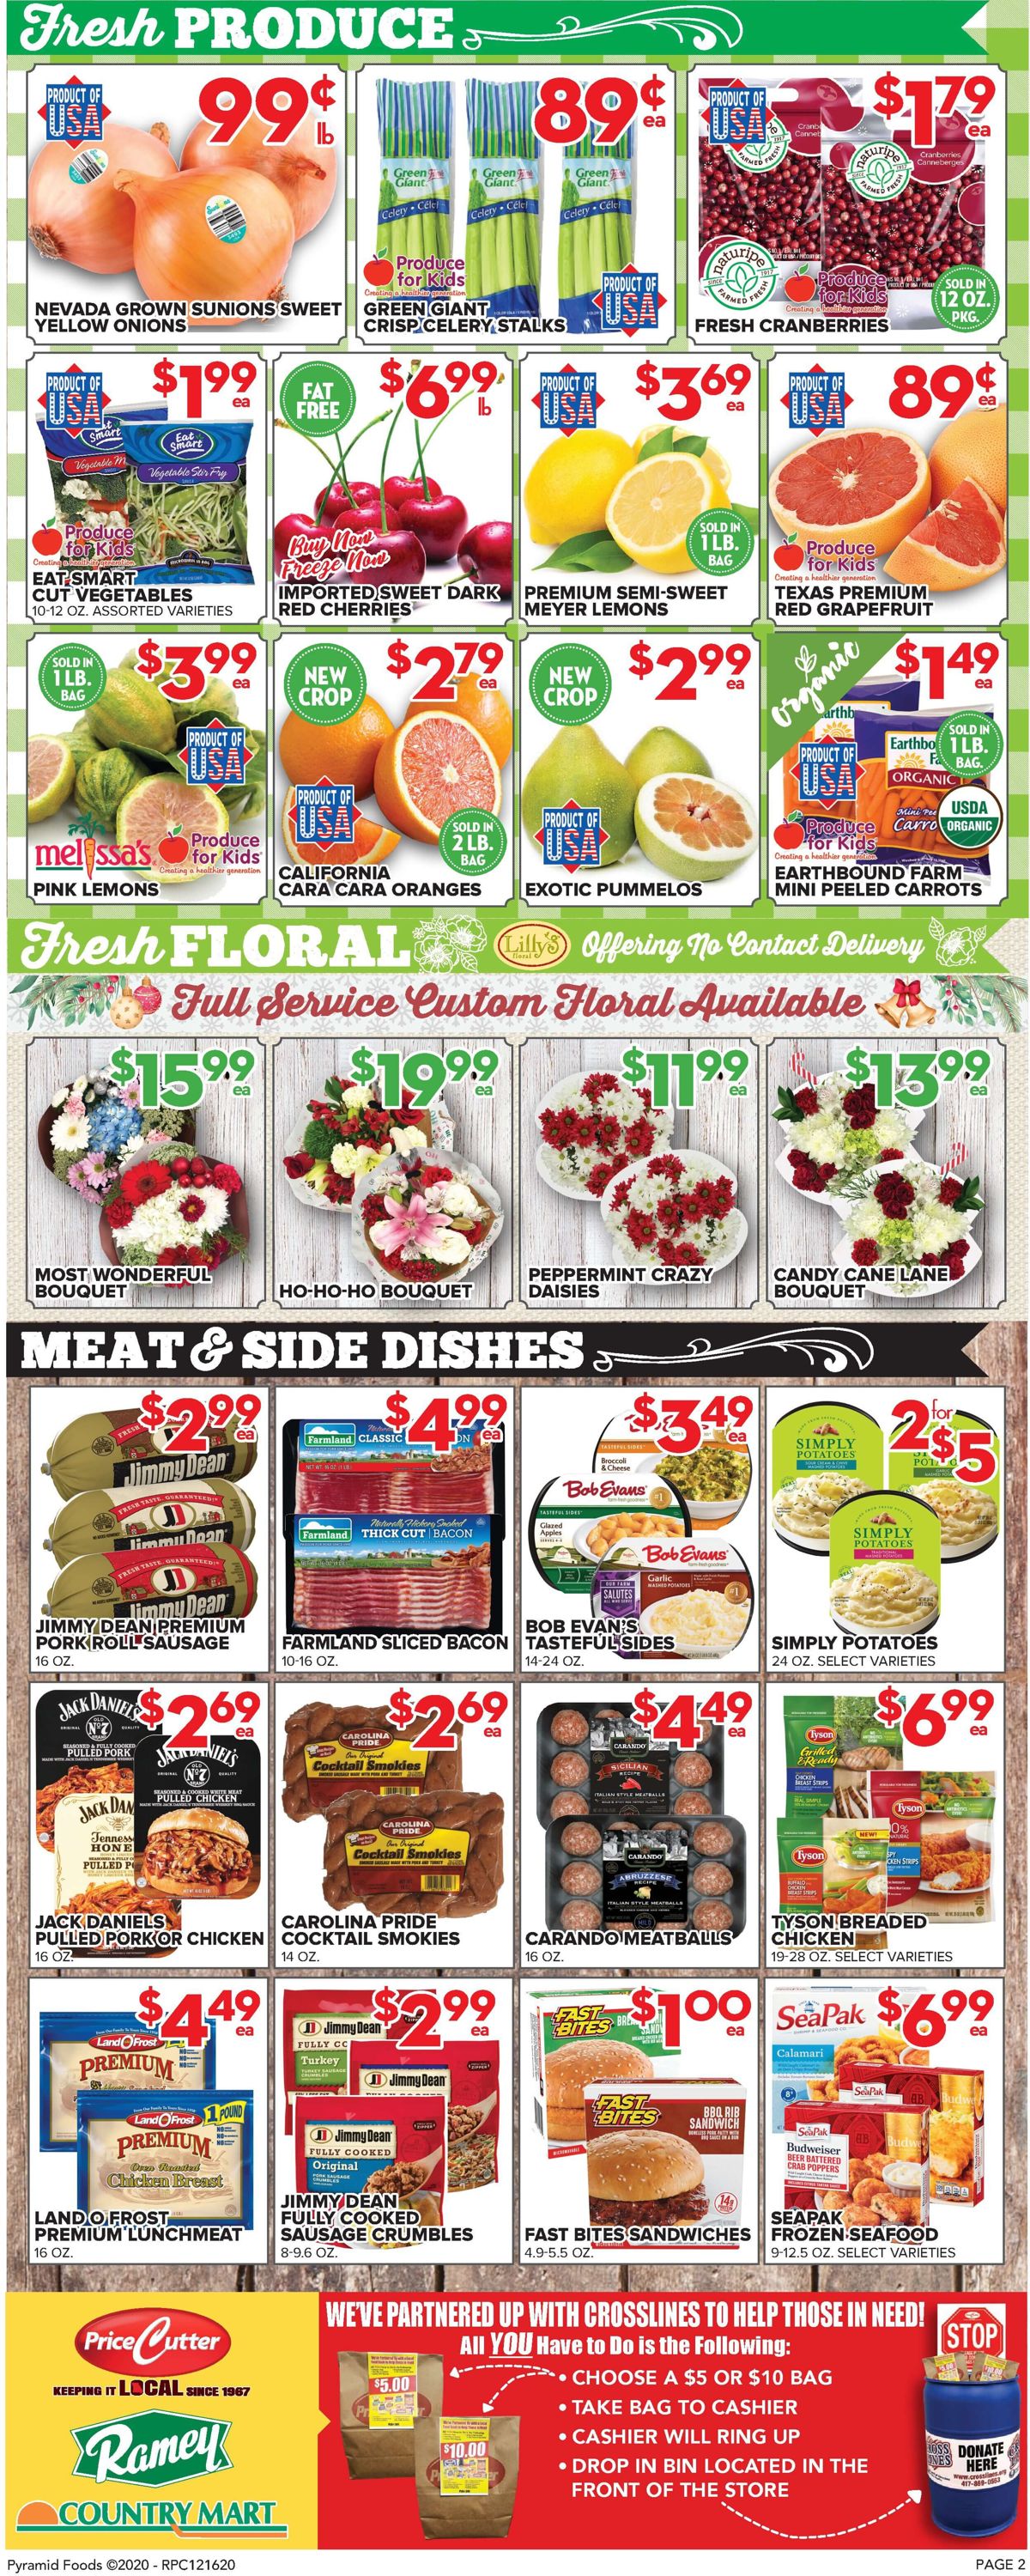 Price Cutter Christmas Ad 2020 Weekly Ad Circular - valid 12/16-12/25/2020 (Page 2)